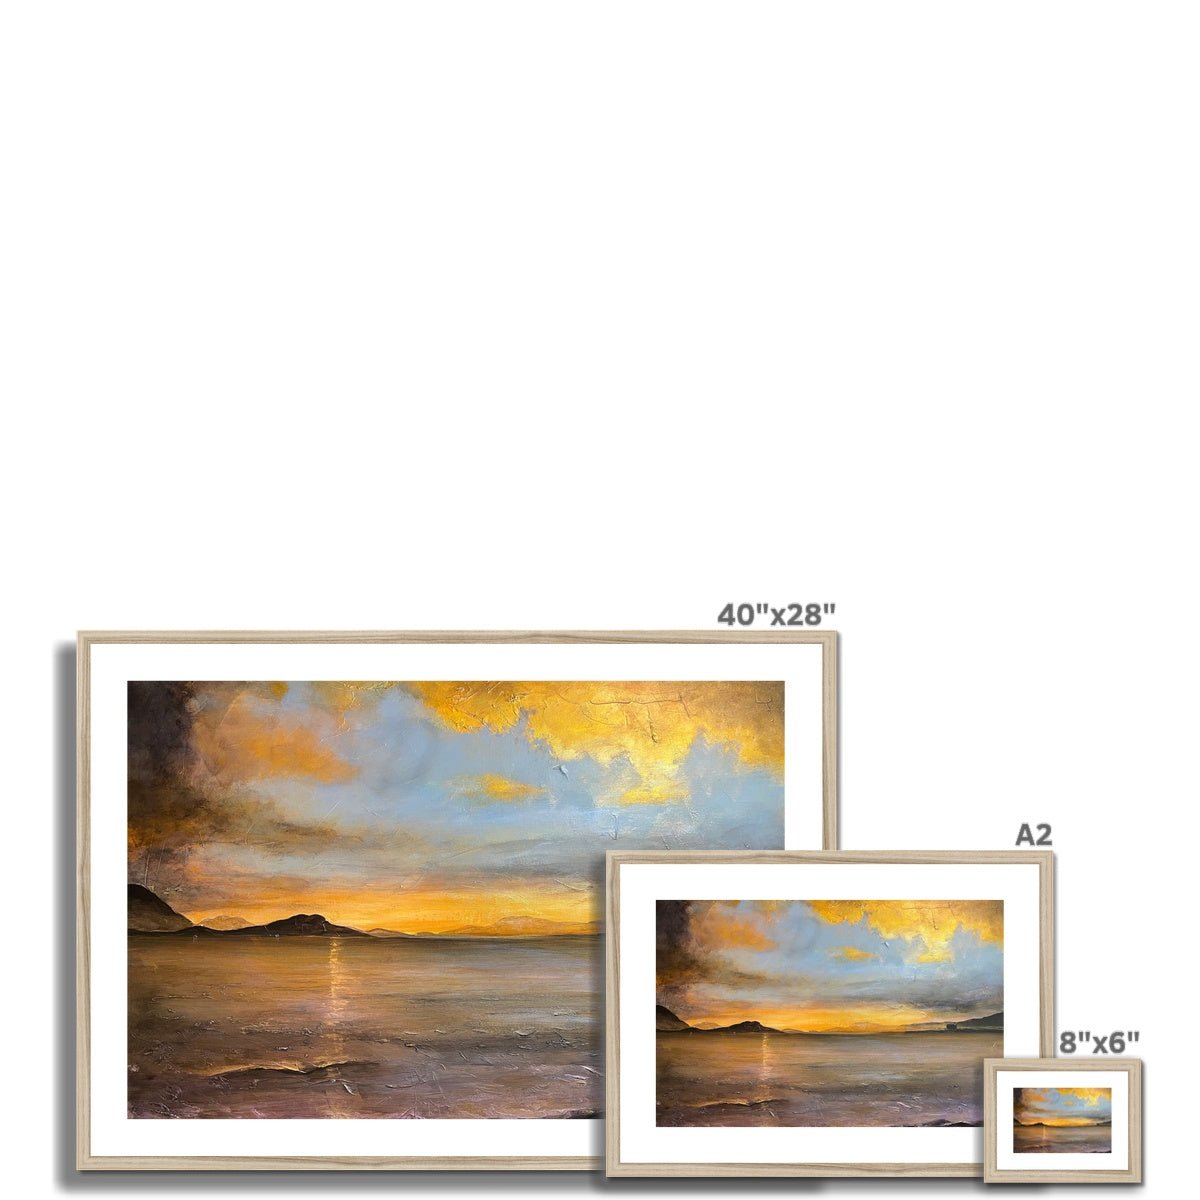 Loch Linnhe Sunset Painting | Framed & Mounted Prints From Scotland-Framed & Mounted Prints-Scottish Lochs & Mountains Art Gallery-Paintings, Prints, Homeware, Art Gifts From Scotland By Scottish Artist Kevin Hunter